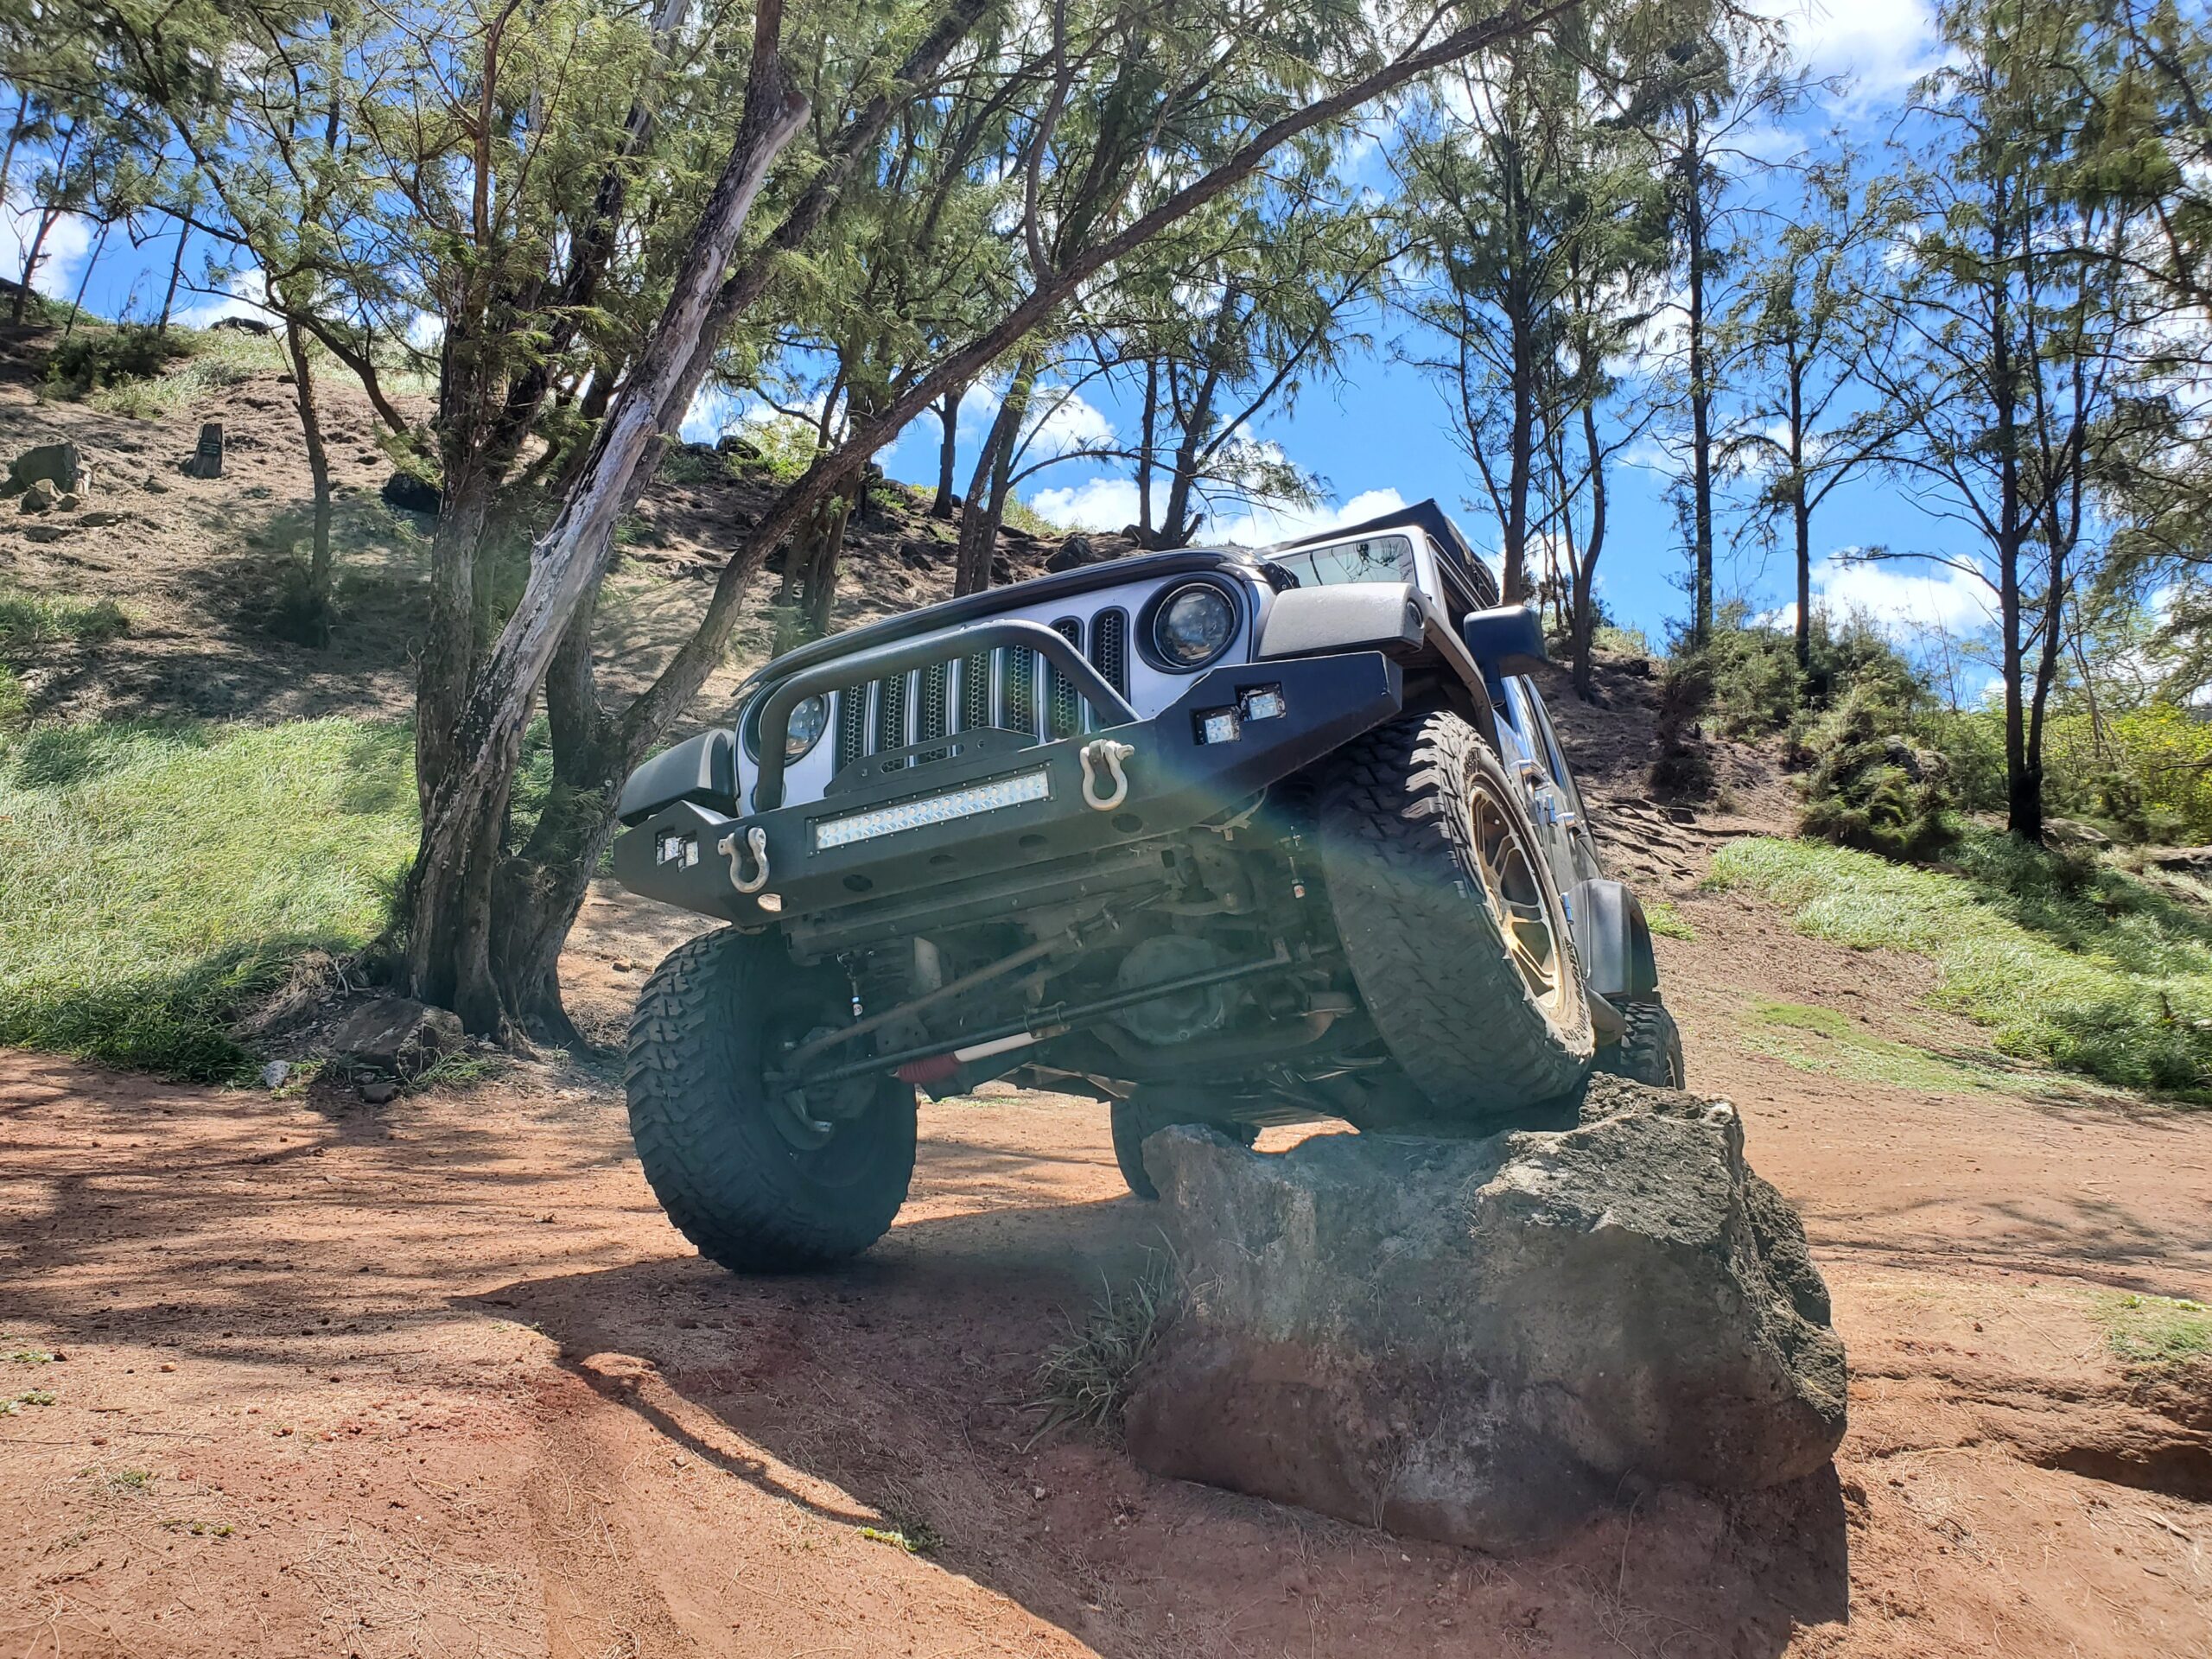 jeep tours in maui